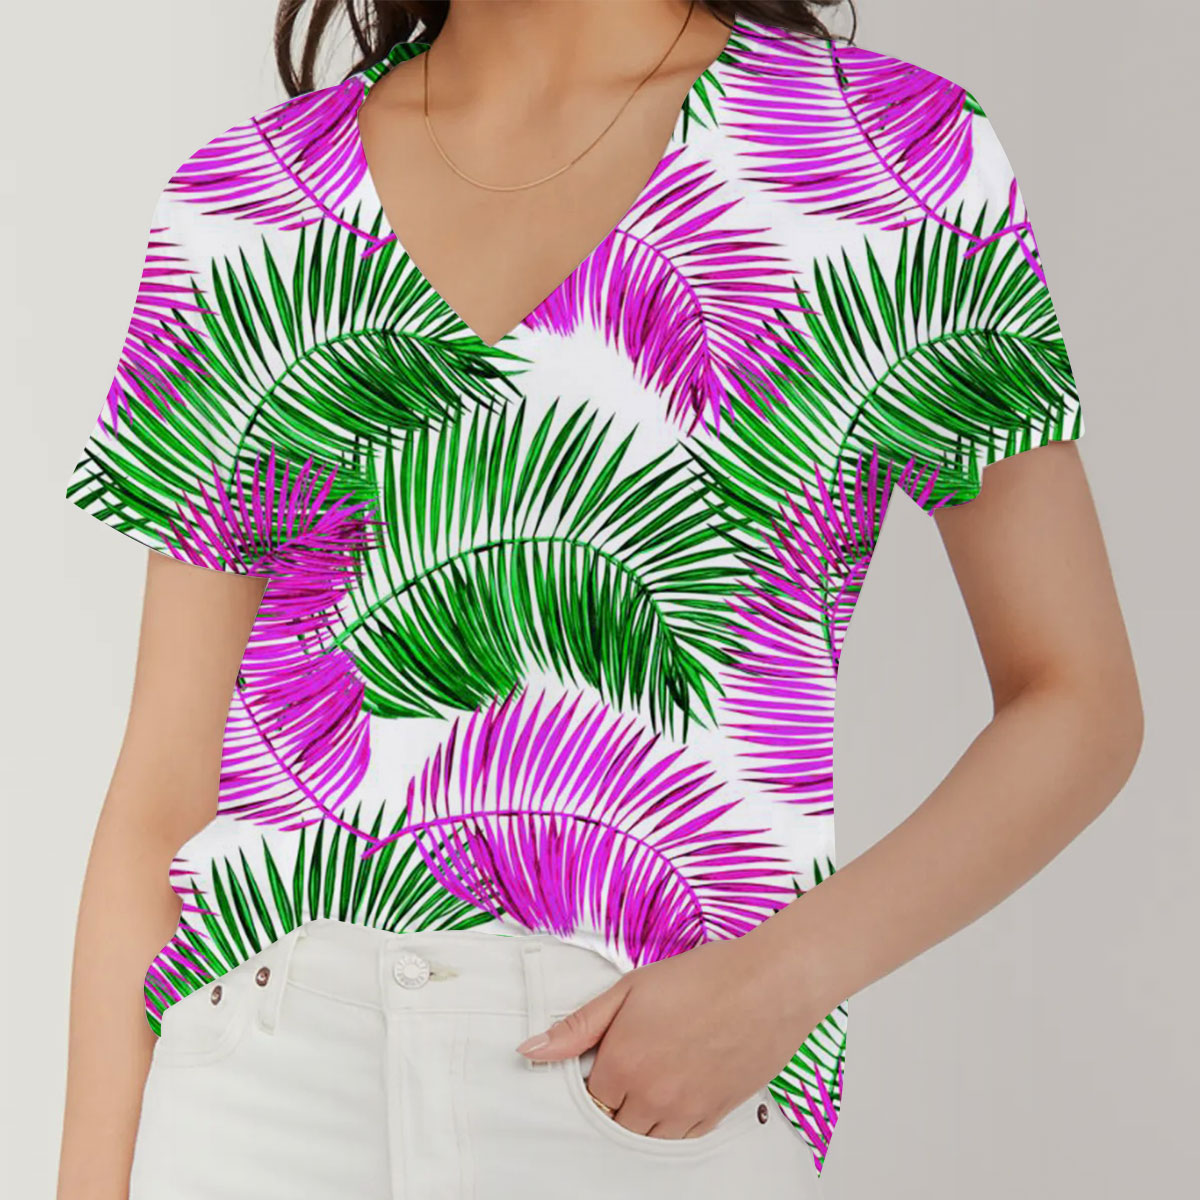 Green And Pink Palm Leaves V-Neck Women's T-Shirt